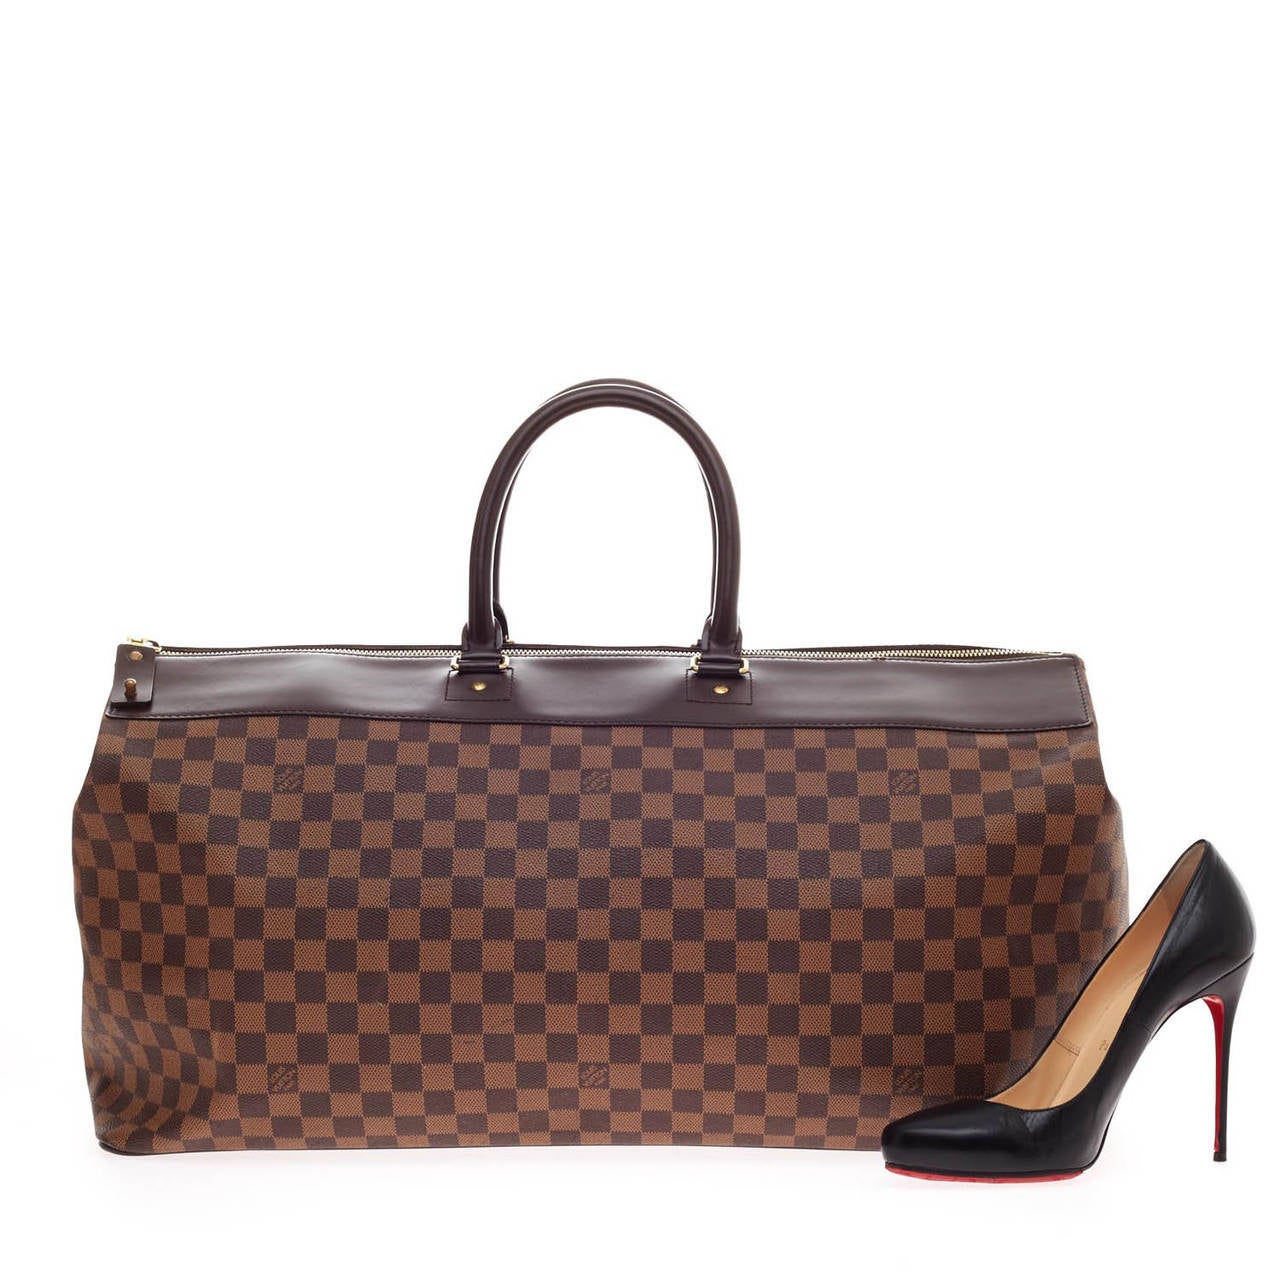 Combining style with functionality, this authentic Louis Vuitton Greenwich in size GM designed in classic Damier Ebene Monogram print and coated canvas is the perfect travel companion. This limited luggage bag features a sturdy top leather panel